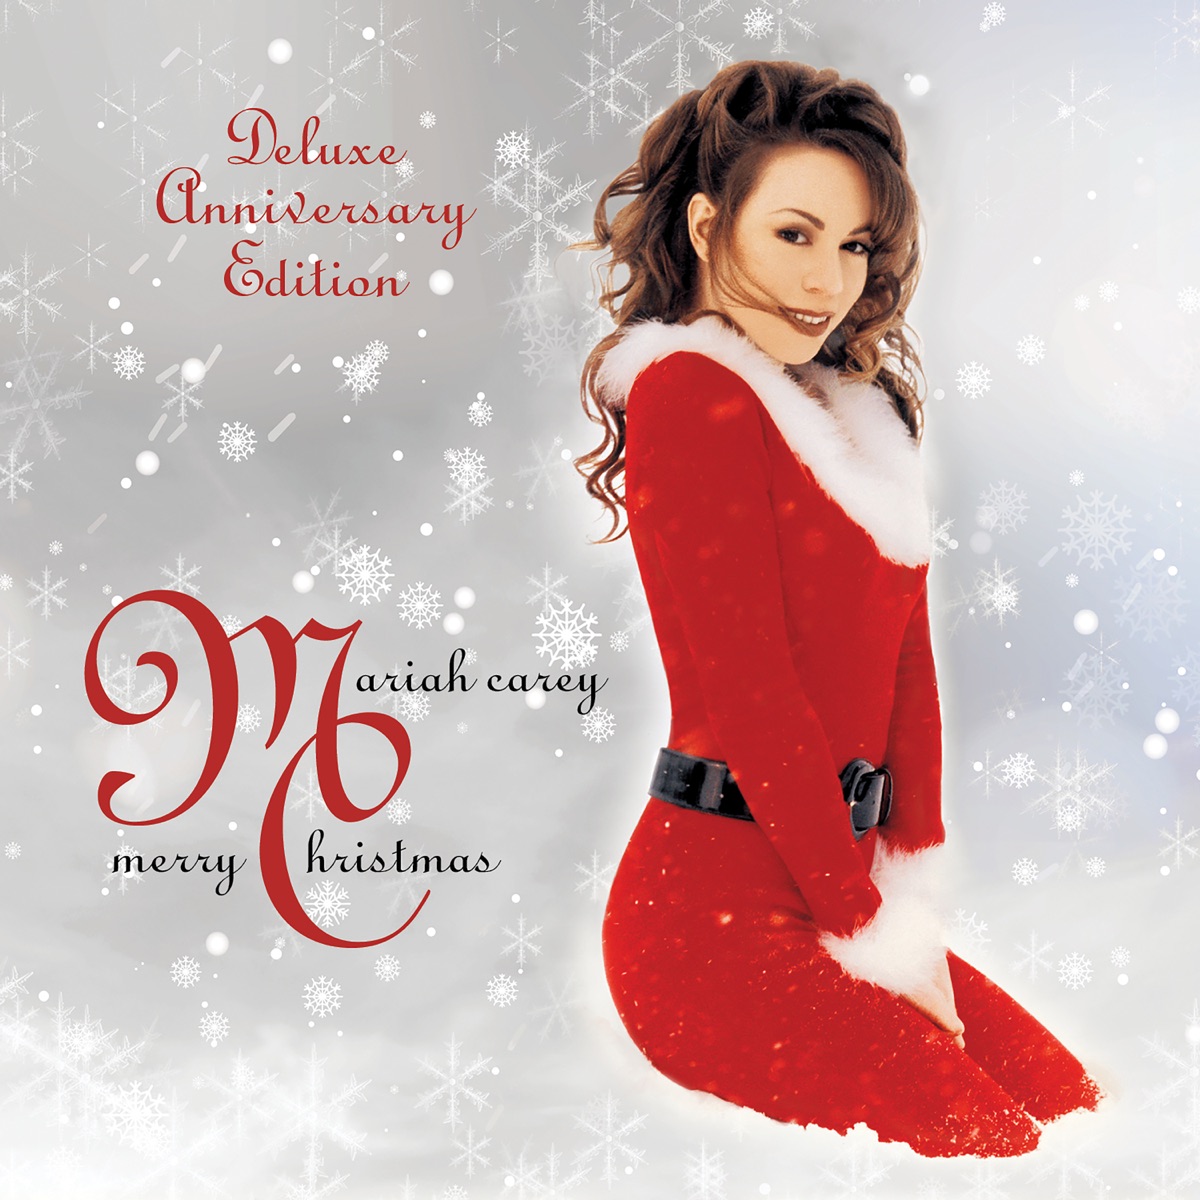 Merry Christmas (Deluxe Anniversary Edition) by Mariah Carey on Apple Music